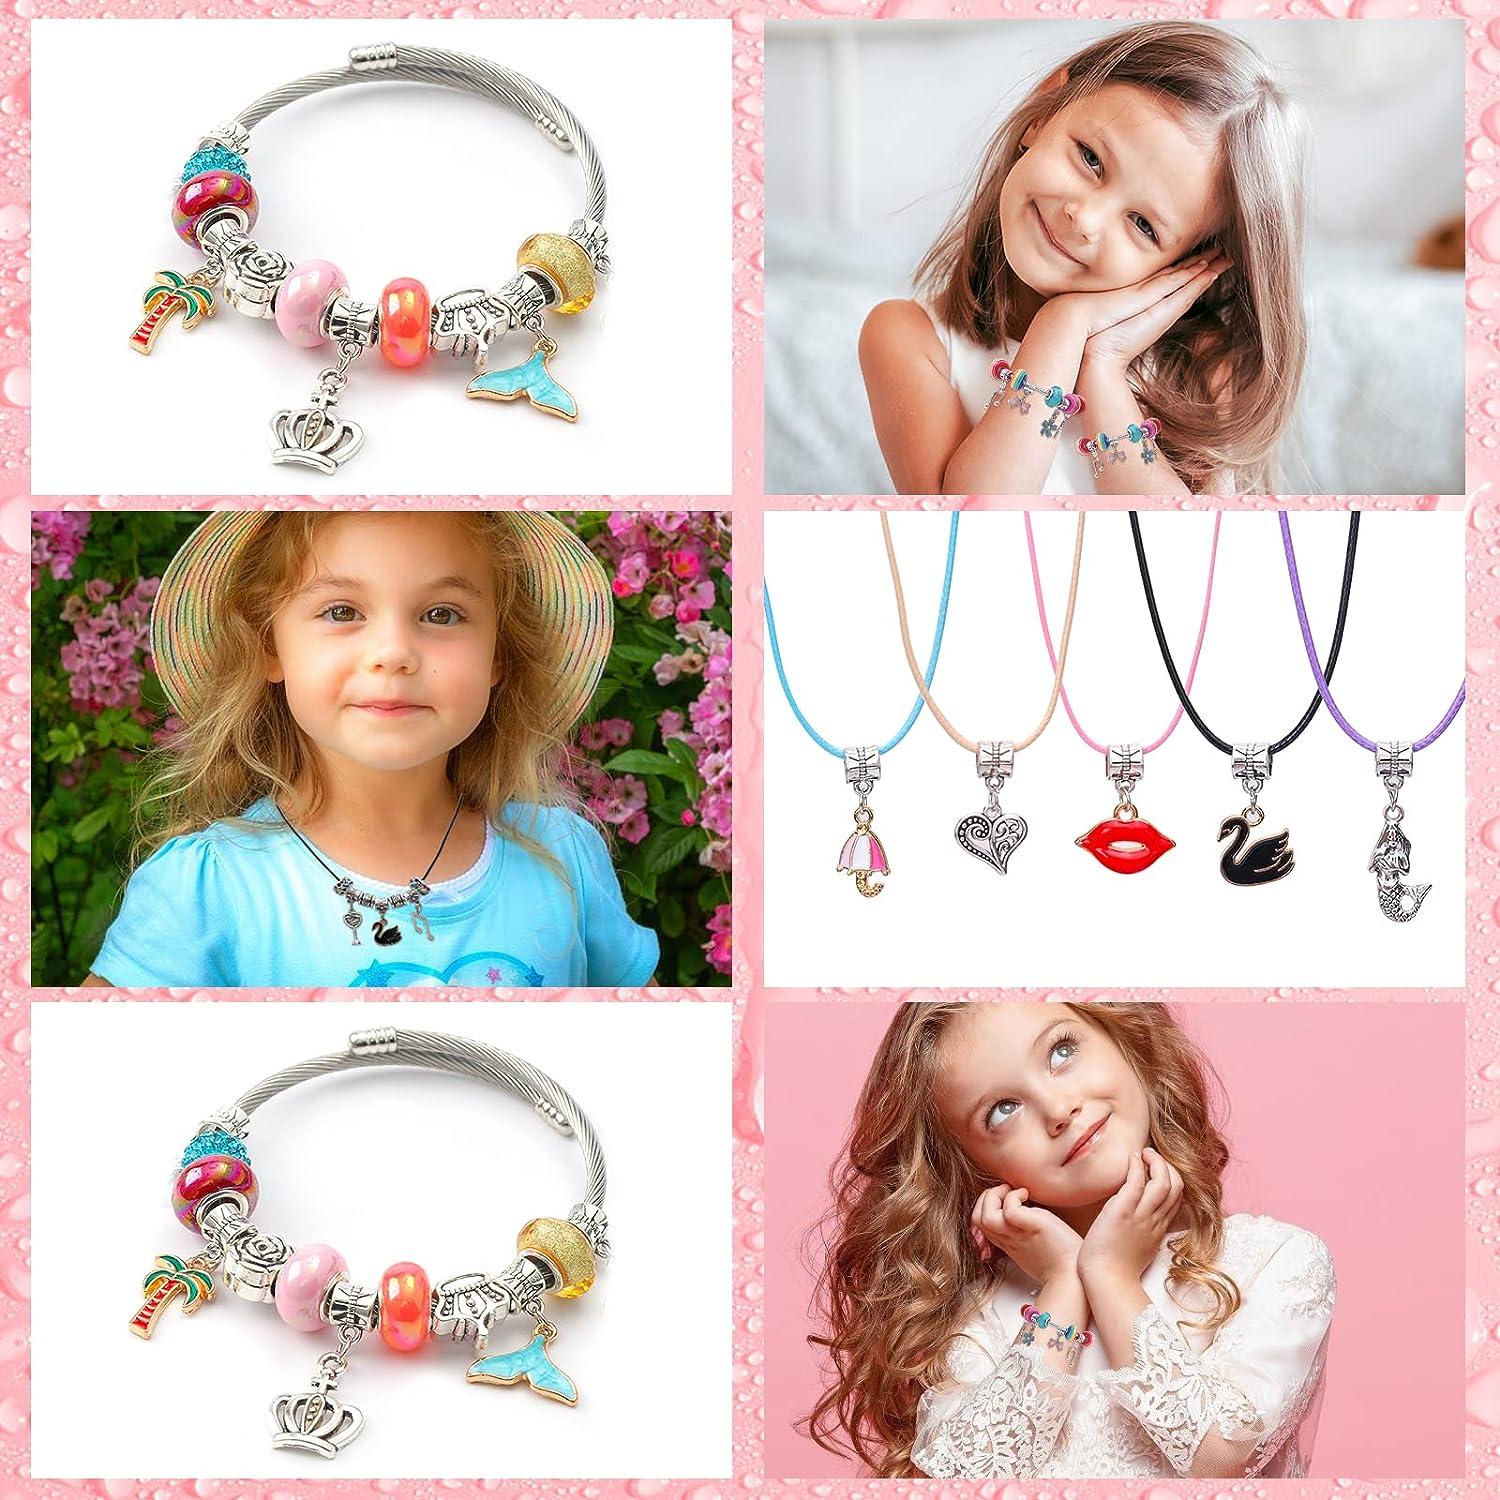 Charm Bracelets Kit with Beads Jewelry Charms Bracelets for DIY Craft  Beautiful Girls Jewelry Making Kit Gifts for Teen Girls